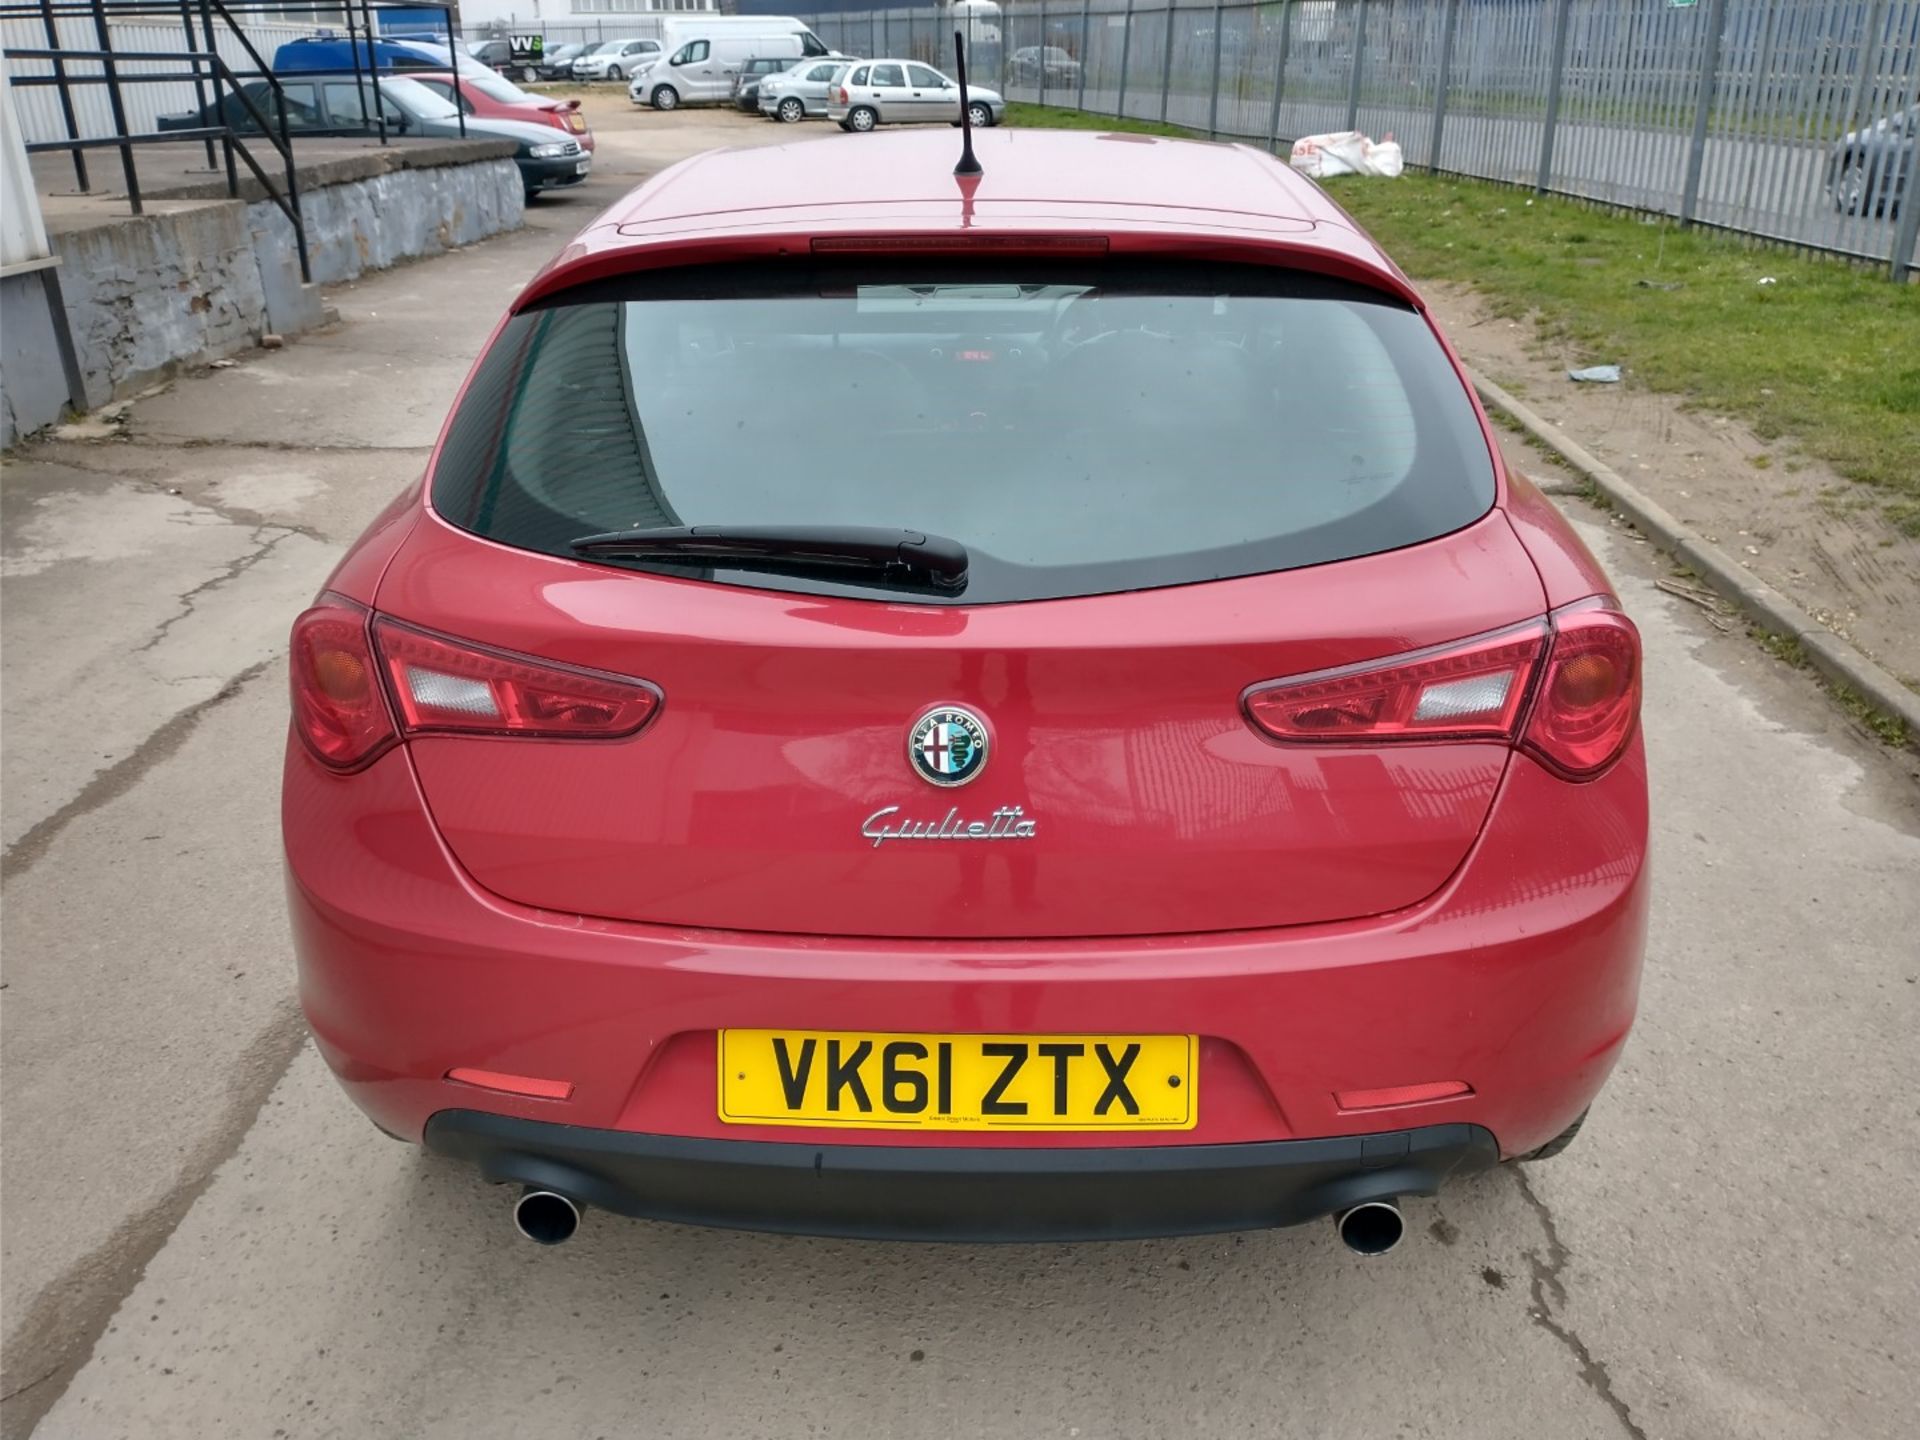 2011 Alfa Romeo Giulietta 2.0 3Dr Hatchback - CL505 - NO VAT ON THE HAMMER - Location: Corby, No - Image 8 of 17